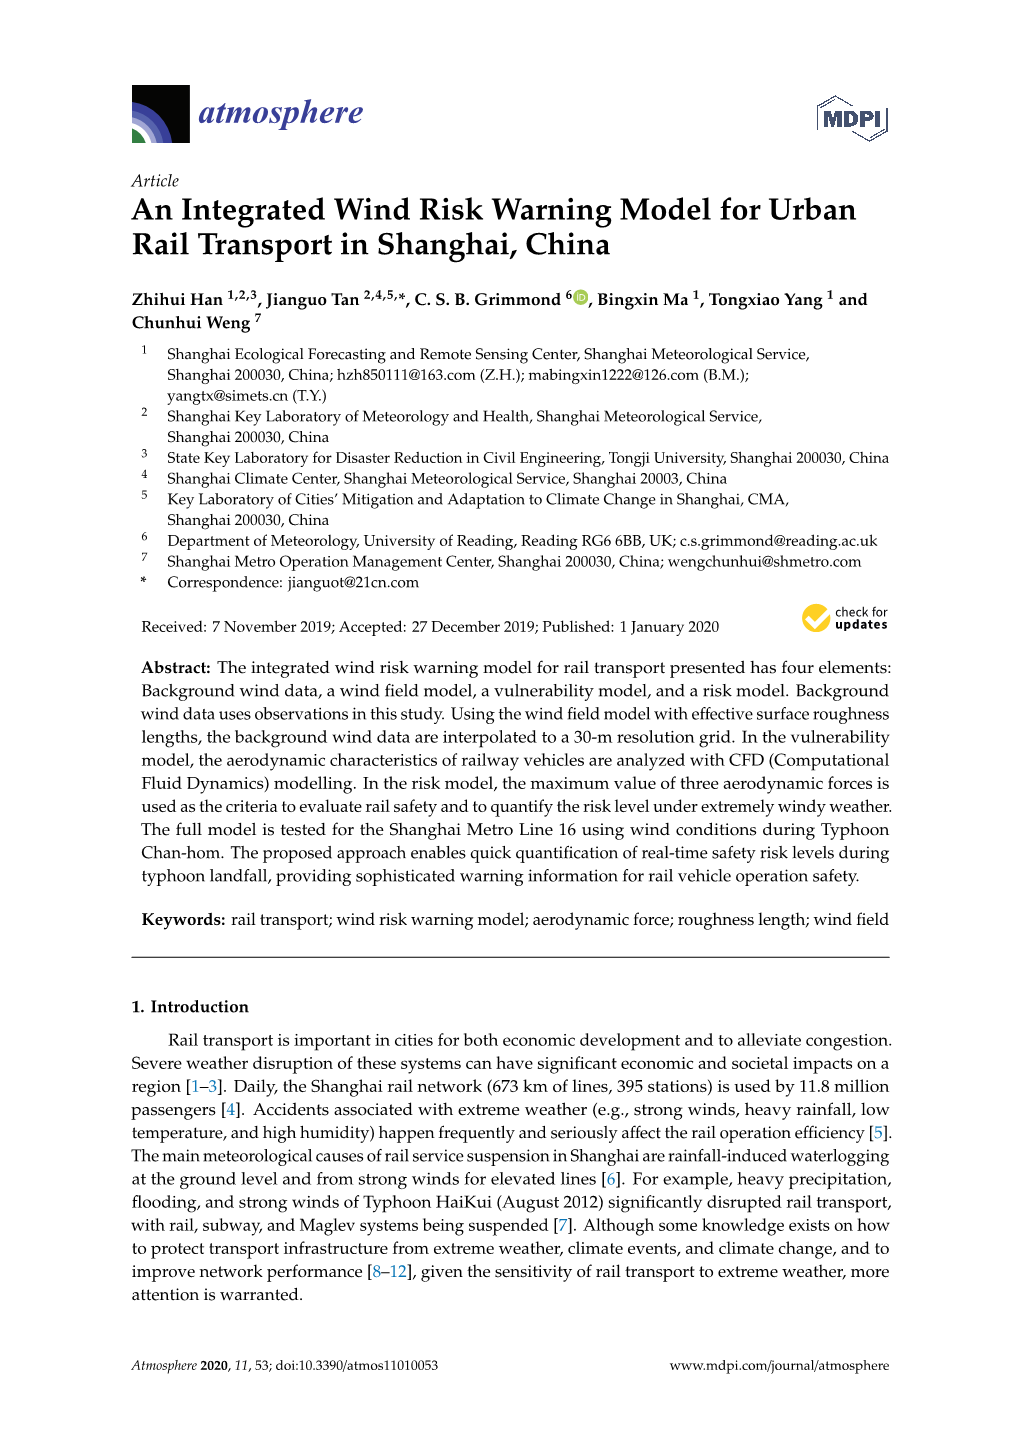 An Integrated Wind Risk Warning Model for Urban Rail Transport in Shanghai, China